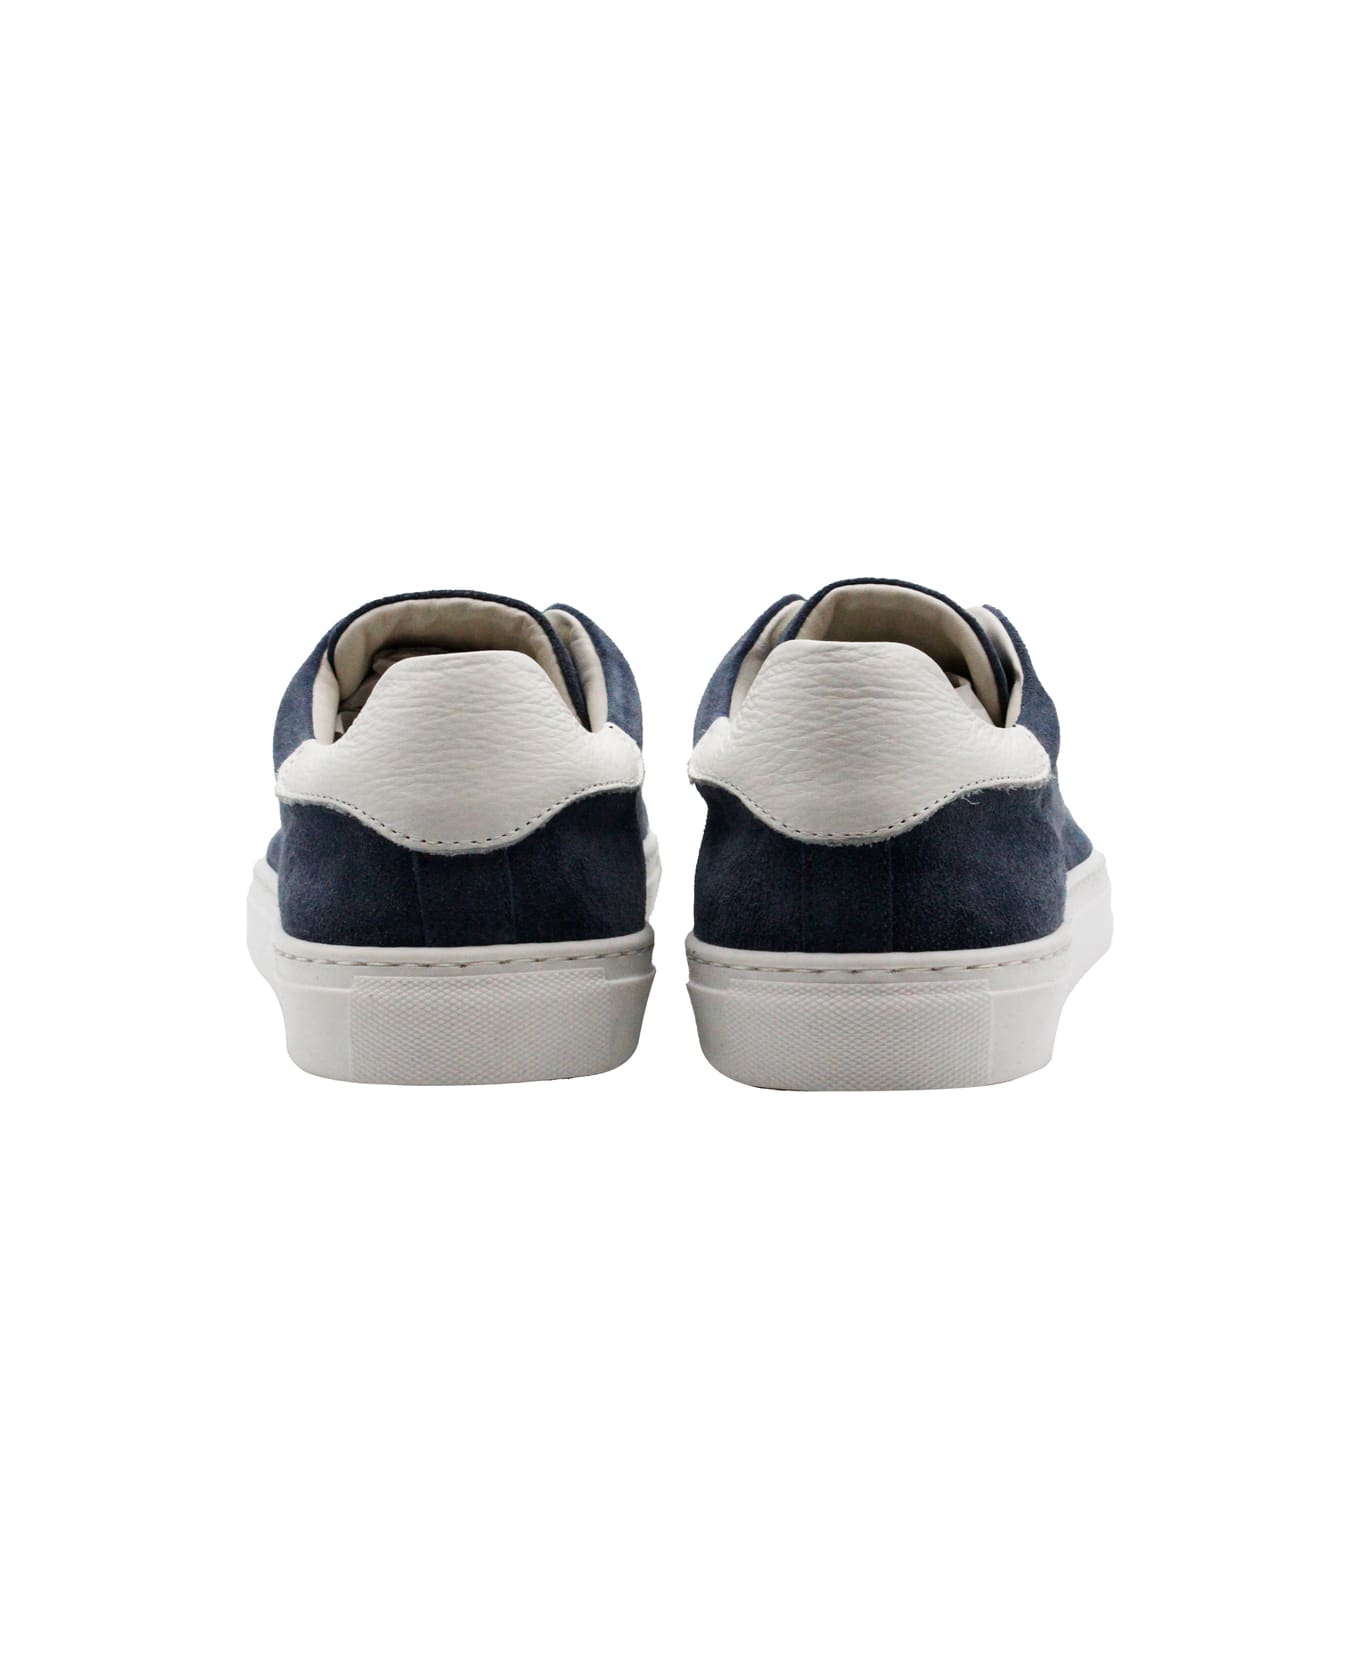 Barba Napoli Sneakers In Soft And Fine Perforated Suede With Lace Closure And Leather Rear Part - Light Blu